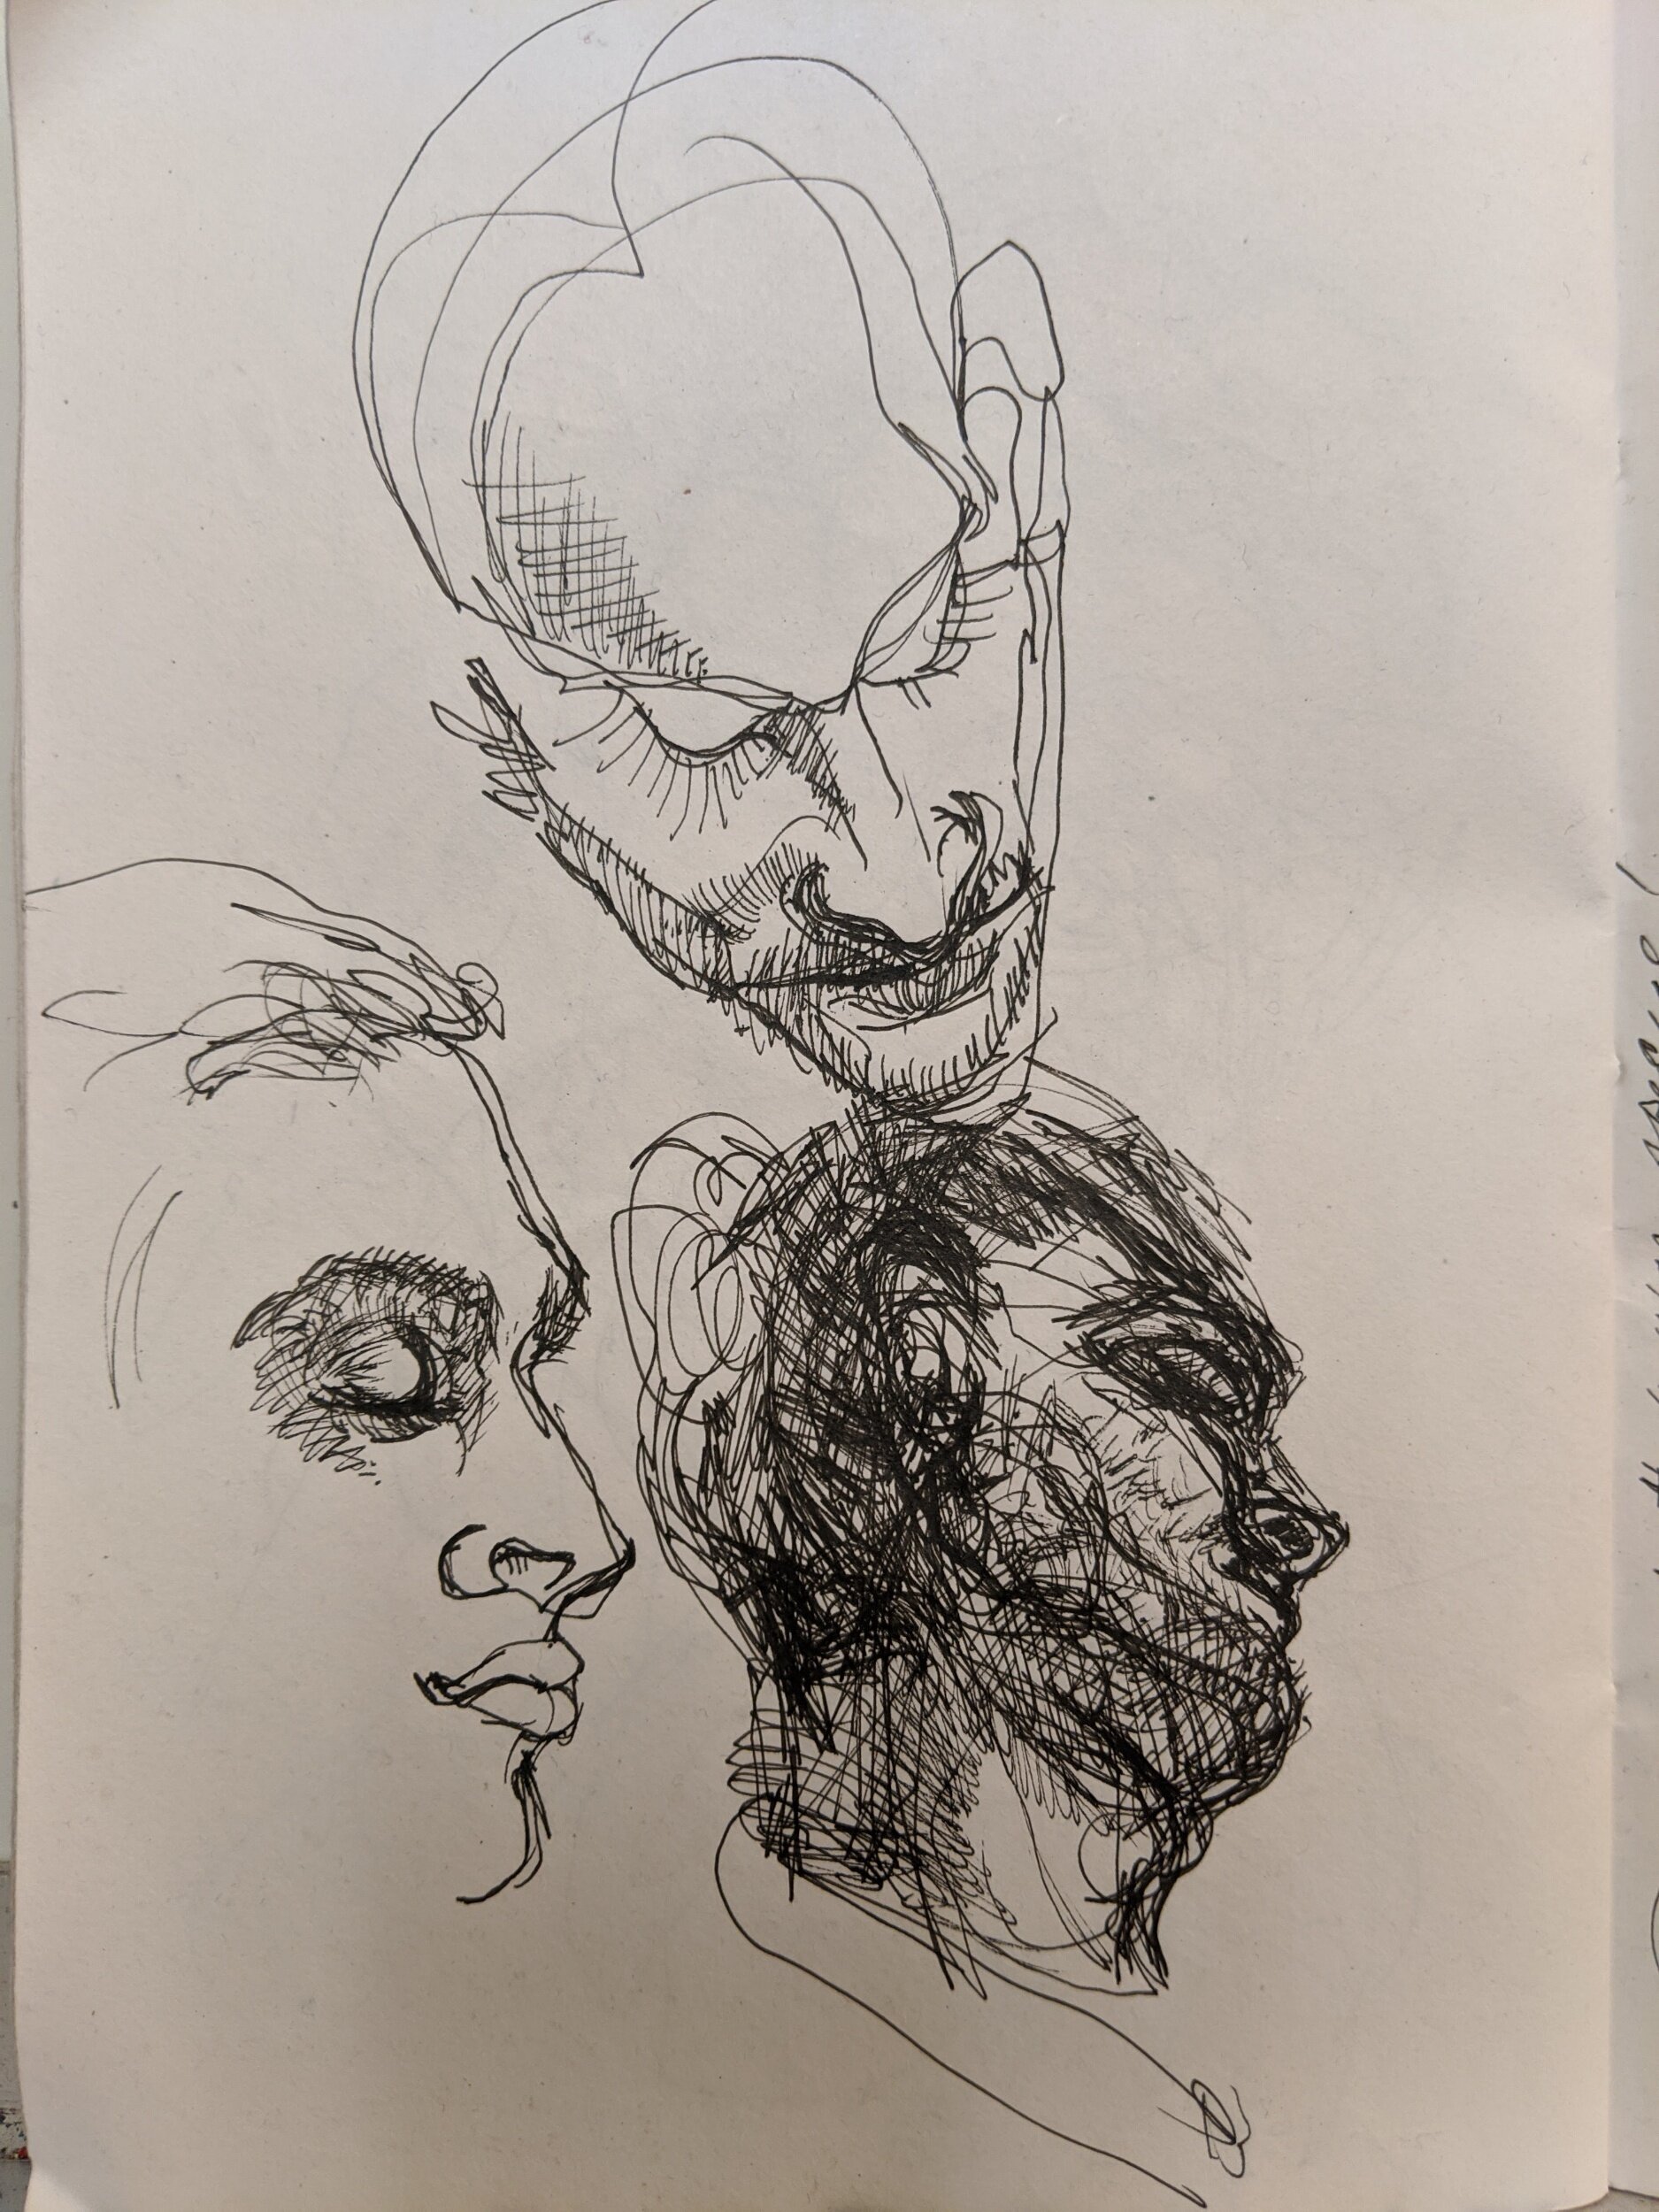 Airplane Sketches: January 2020